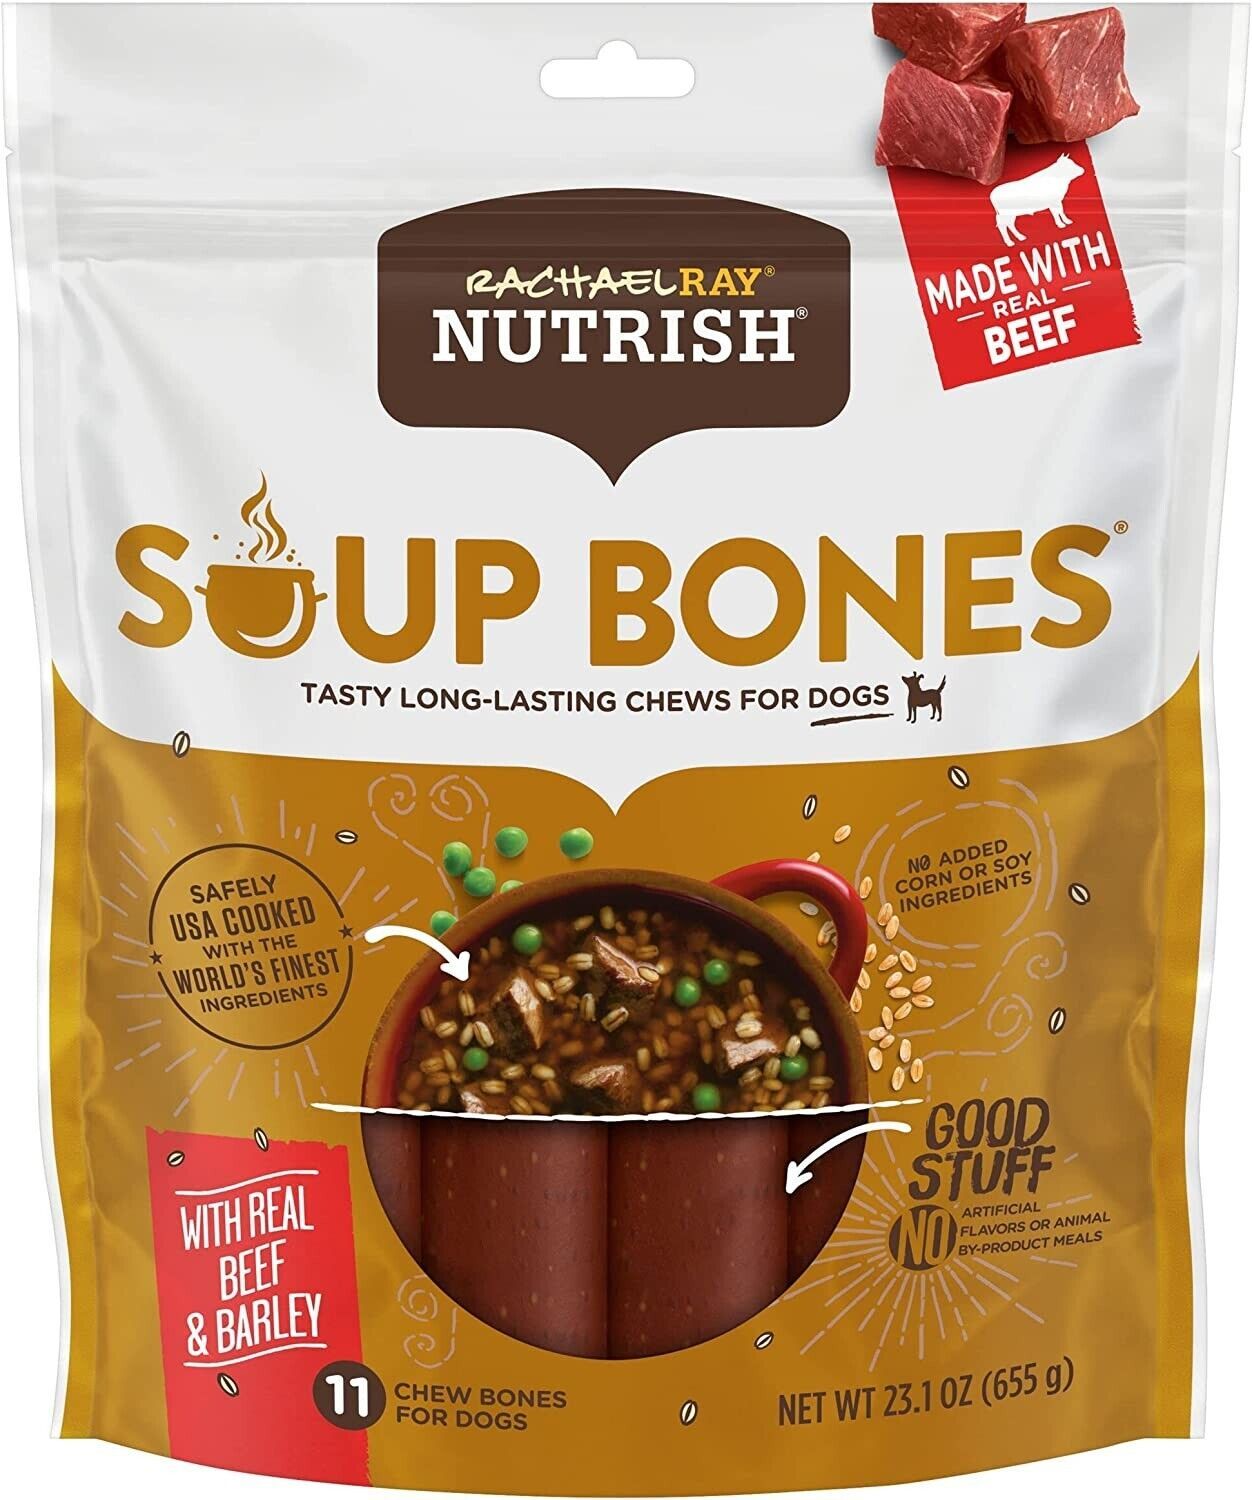 Primary image for Rachael Ray Nutrish Soup Bones Dog Treats - Beef and Barley